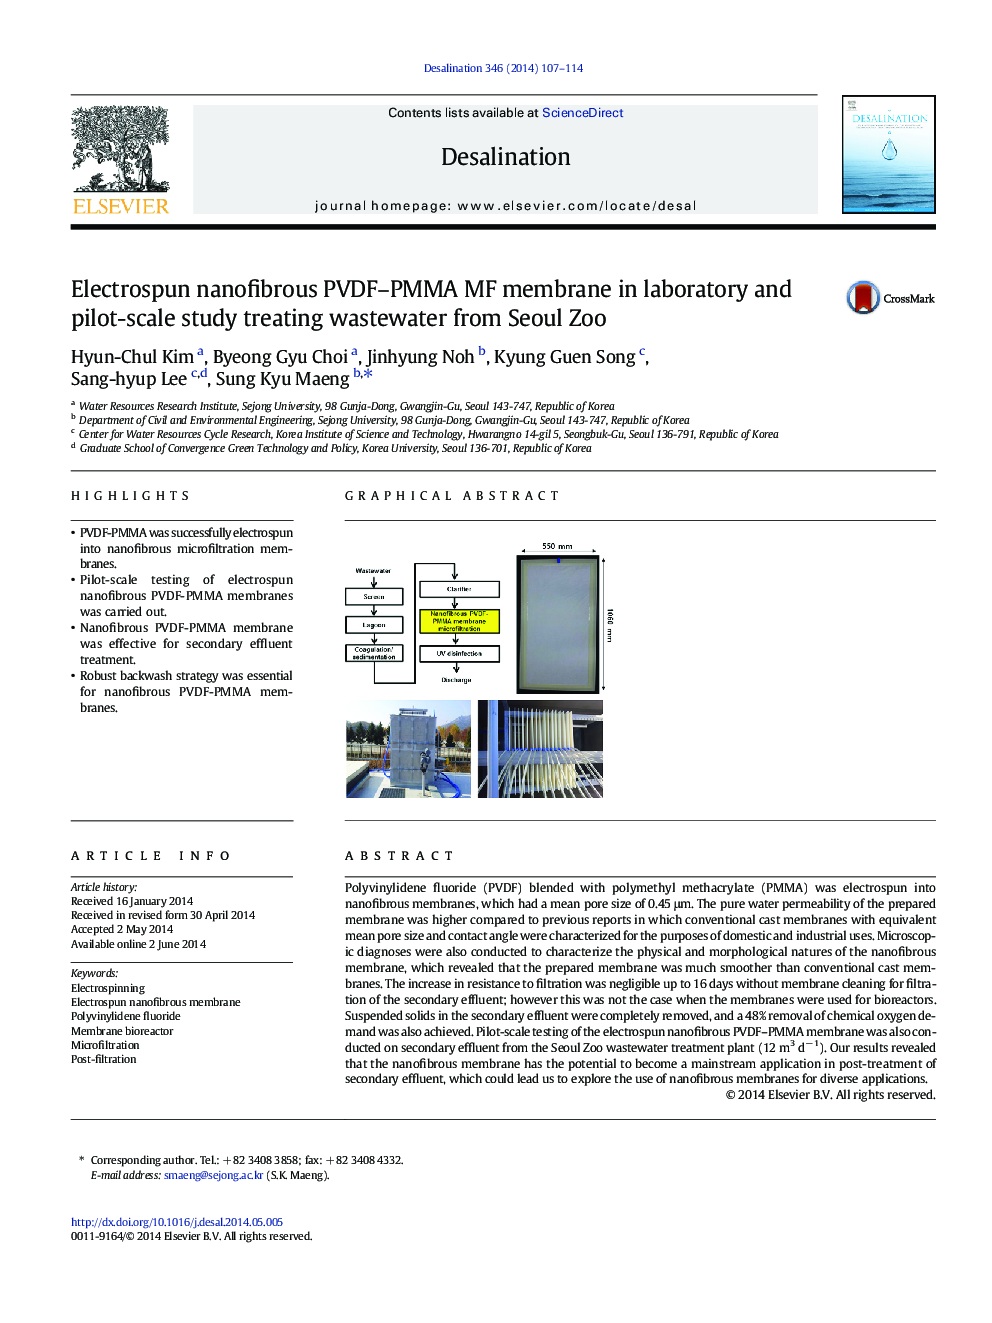 Electrospun nanofibrous PVDF–PMMA MF membrane in laboratory and pilot-scale study treating wastewater from Seoul Zoo